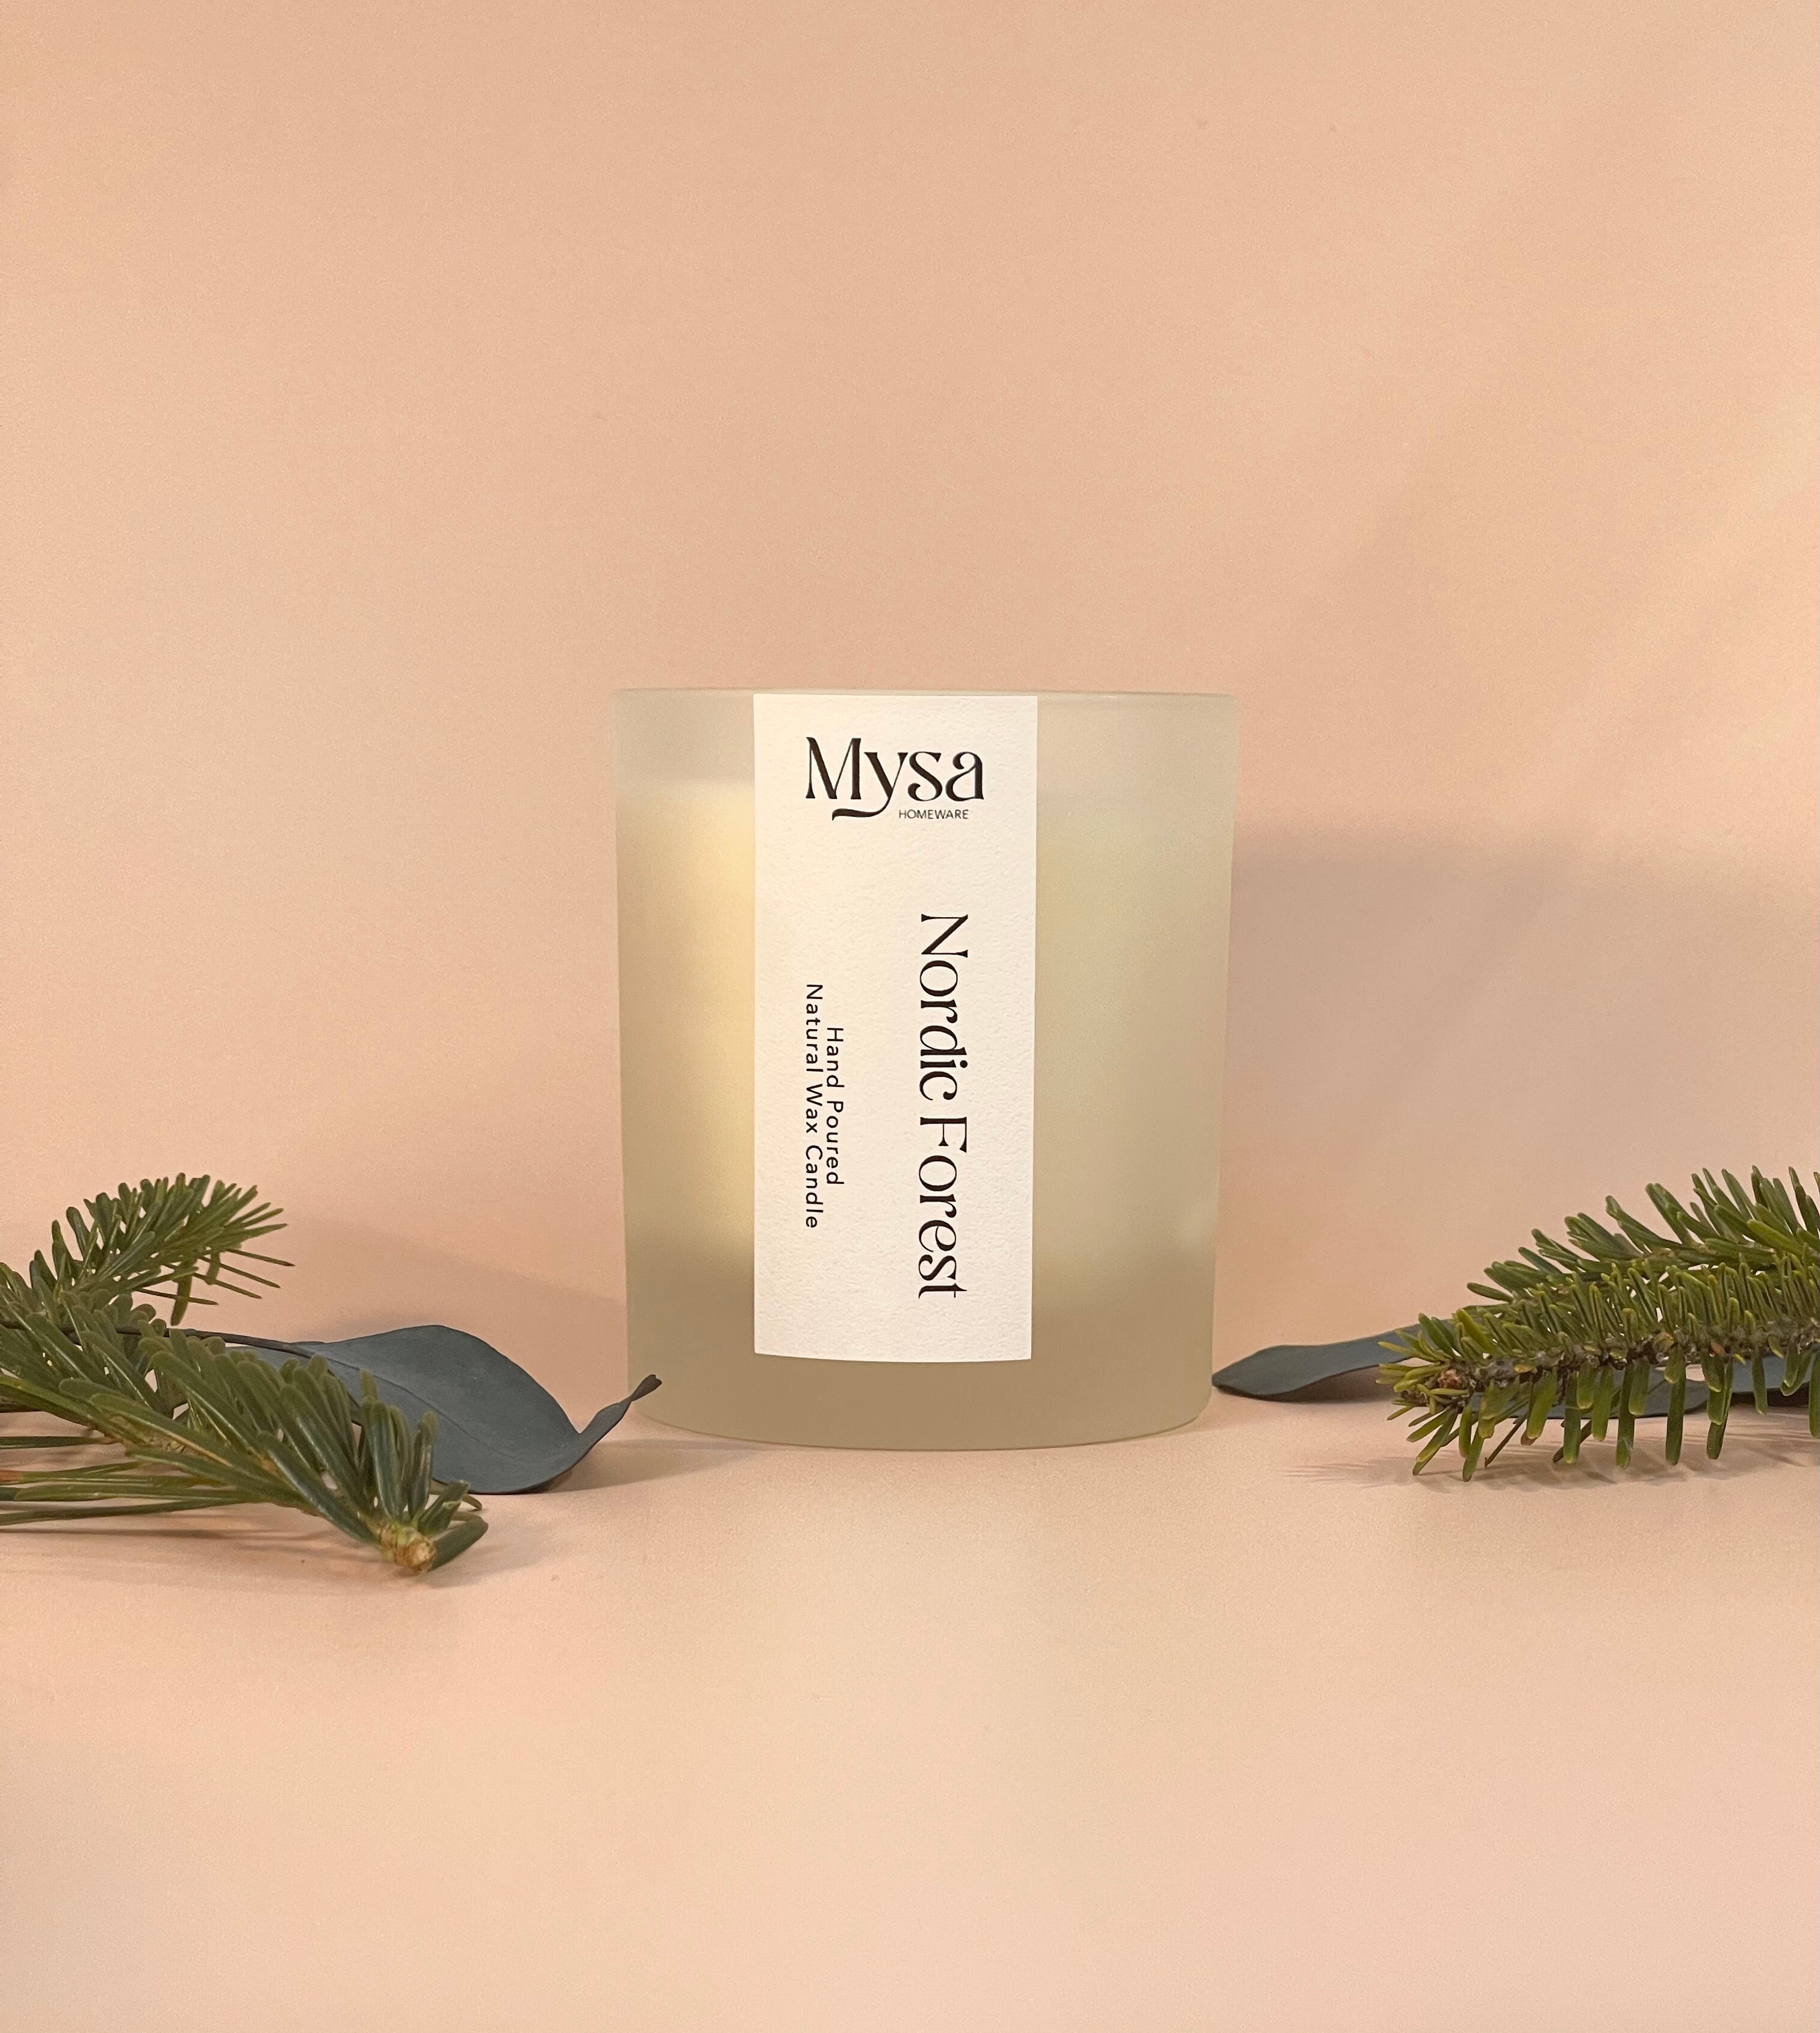 Nordic Forest luxury scented candle crafted from natural wax, featuring a delightful blend of pine and eucalyptus  fragrance.